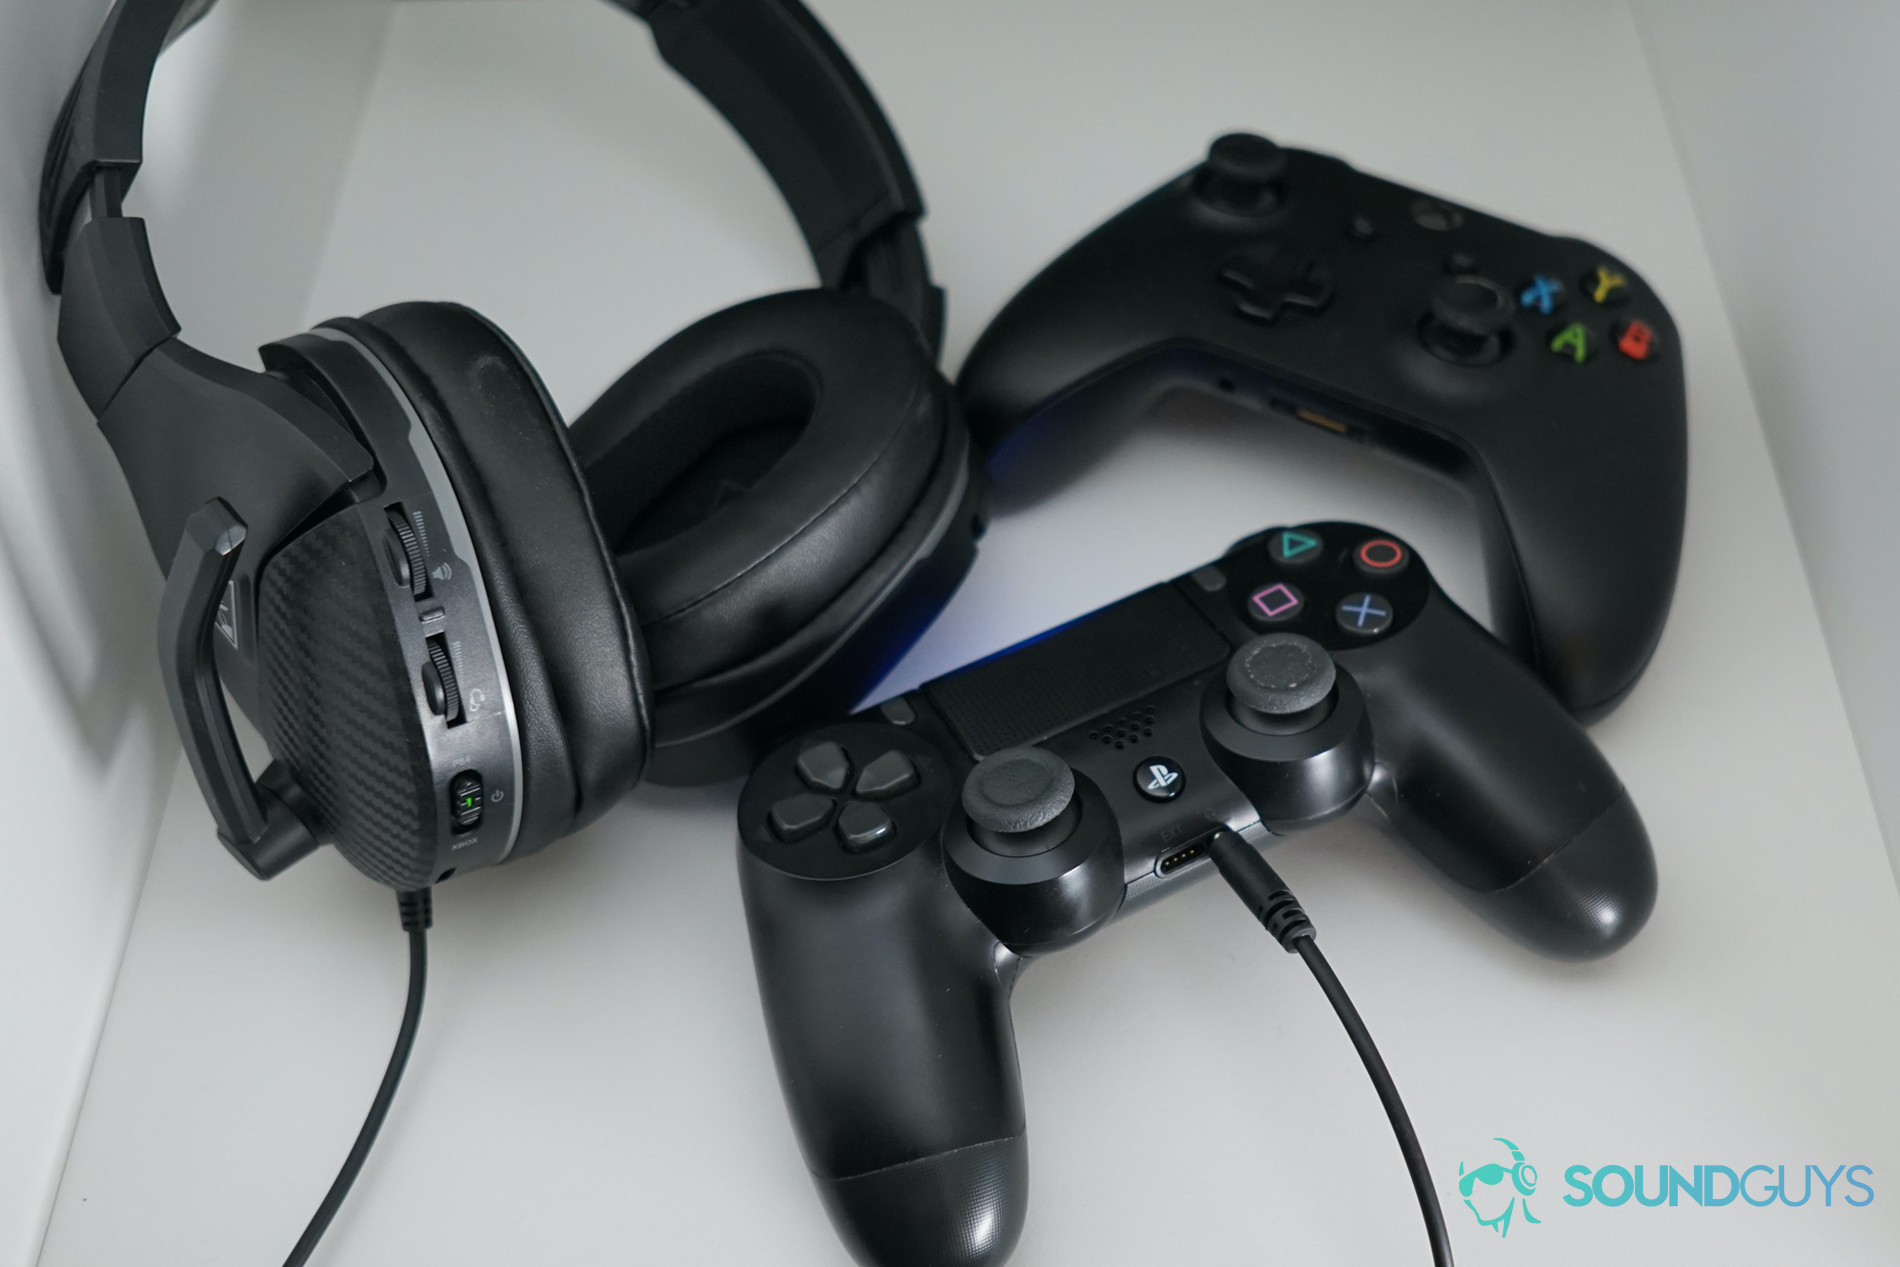 The Turtle Beach Recon 200 sits on a shelf next to a Playstation Dualshock 4 controller and an Xbox One controller